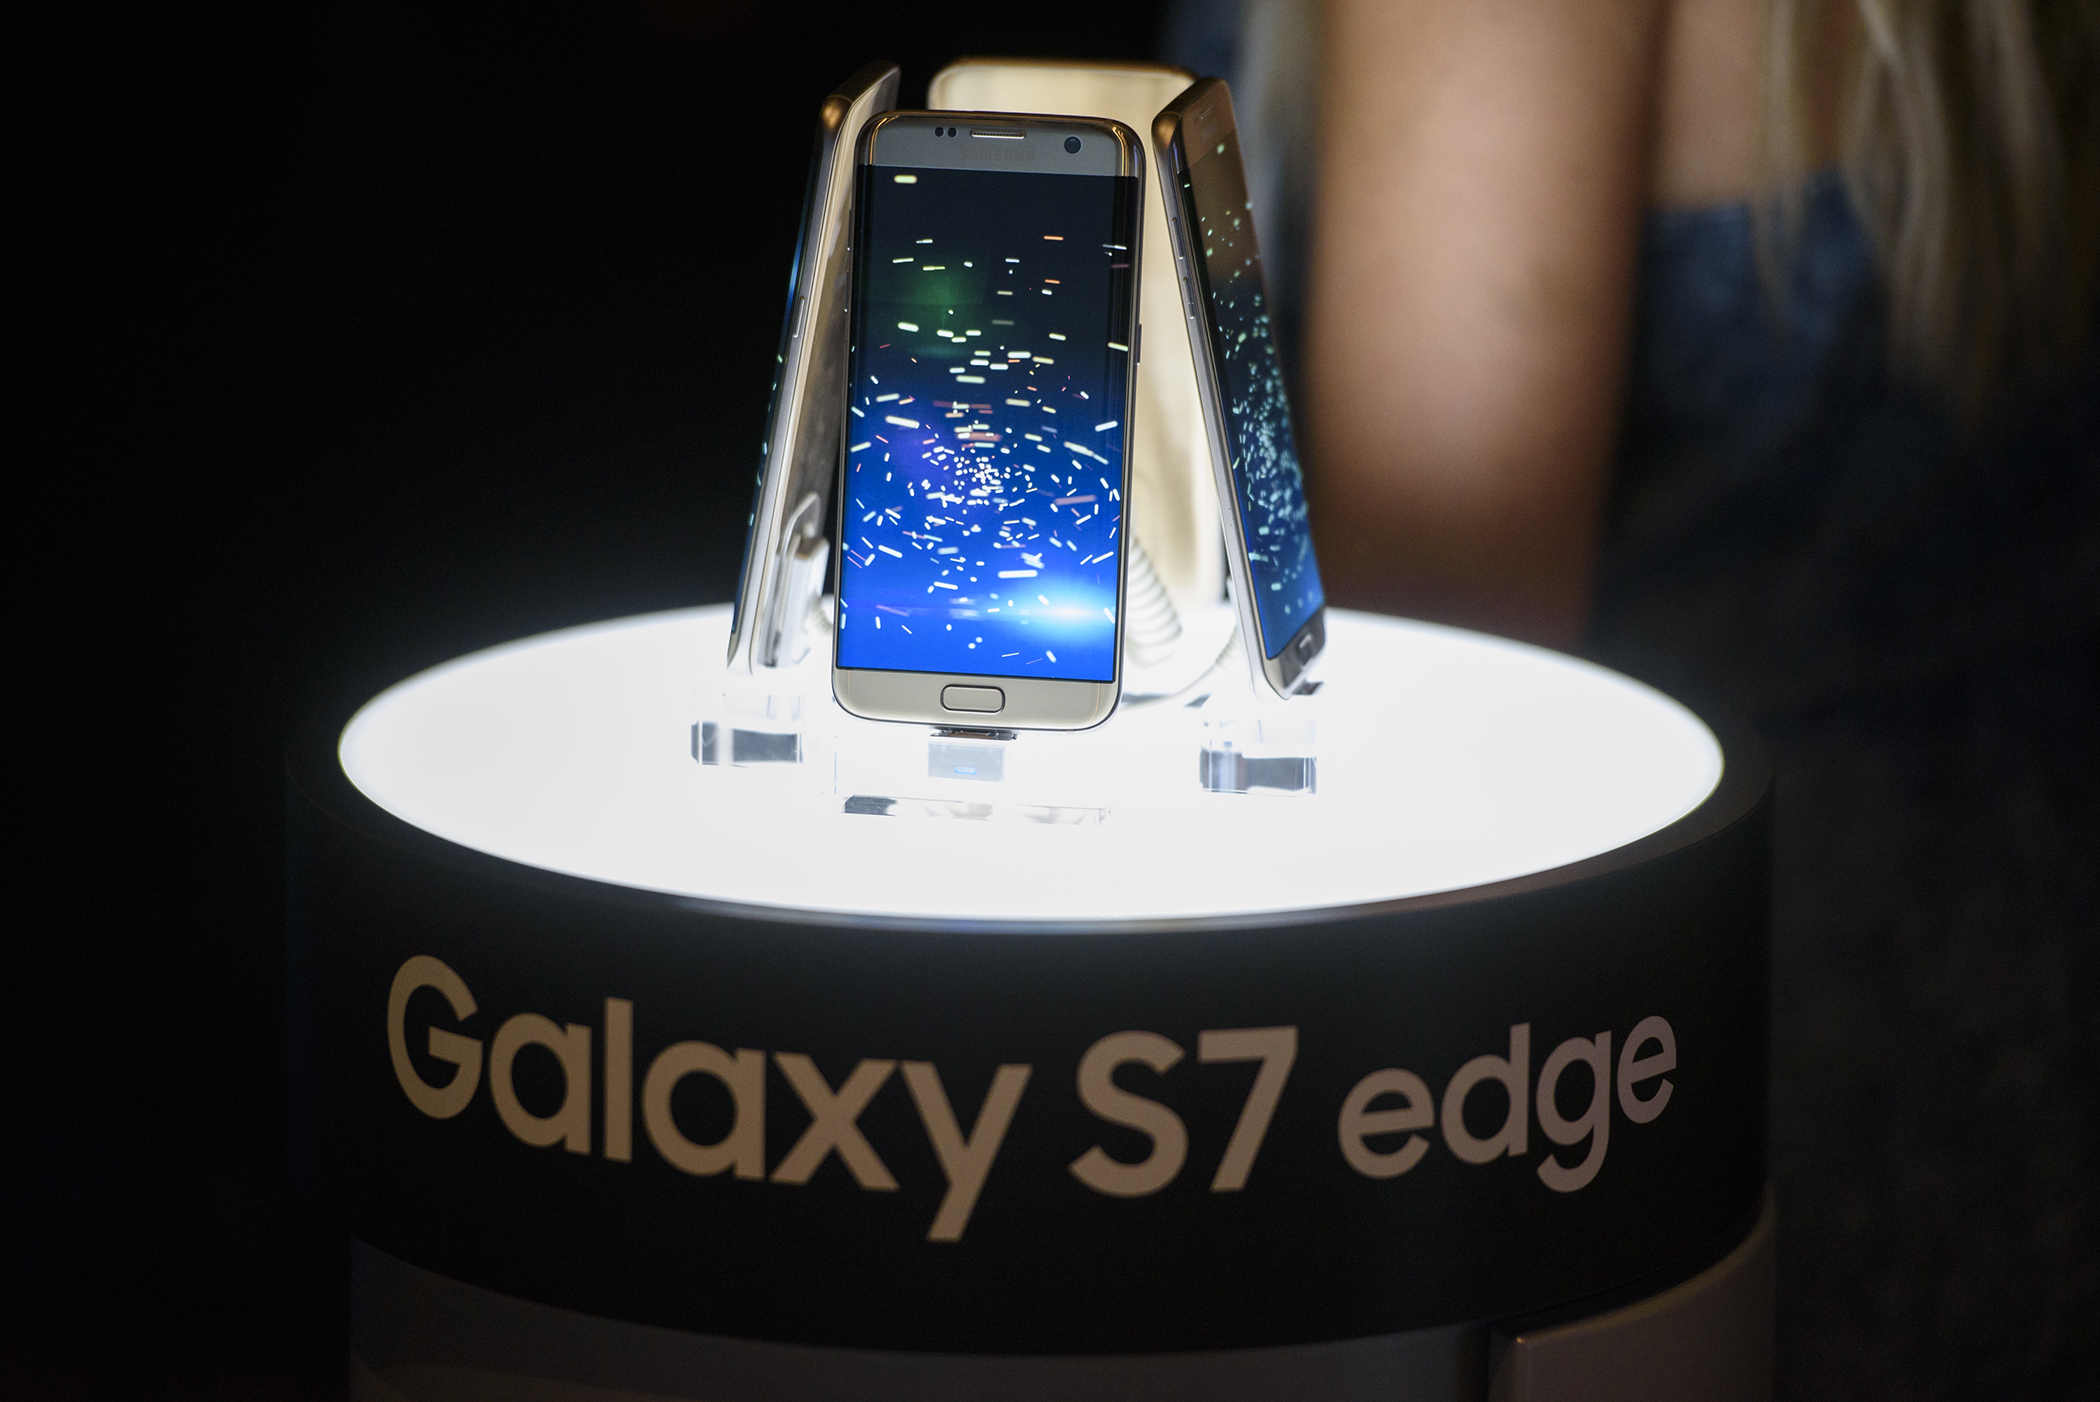 A view of the Samsung Galaxy S7 edge cell phone on display at Samsung 837 on July 19, 2016 in New York City.